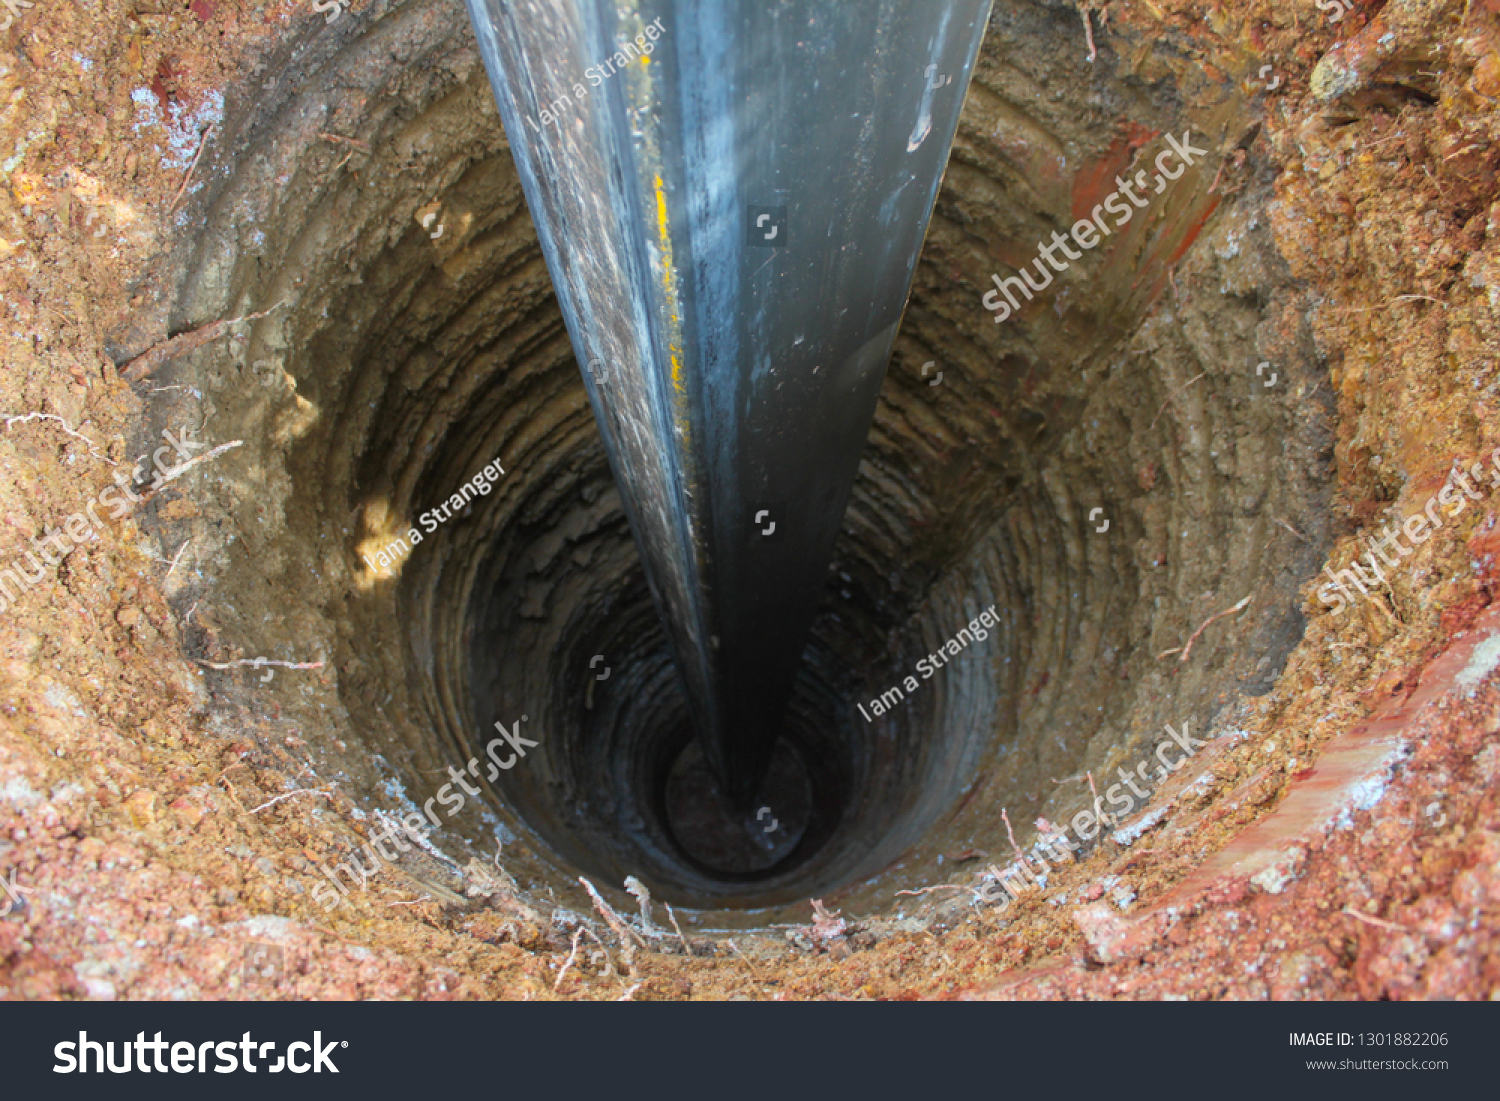 Water Well Drilling, Dig a well for water, Inside The Well, Groundwater hole drilling machine, boreholes #1301882206